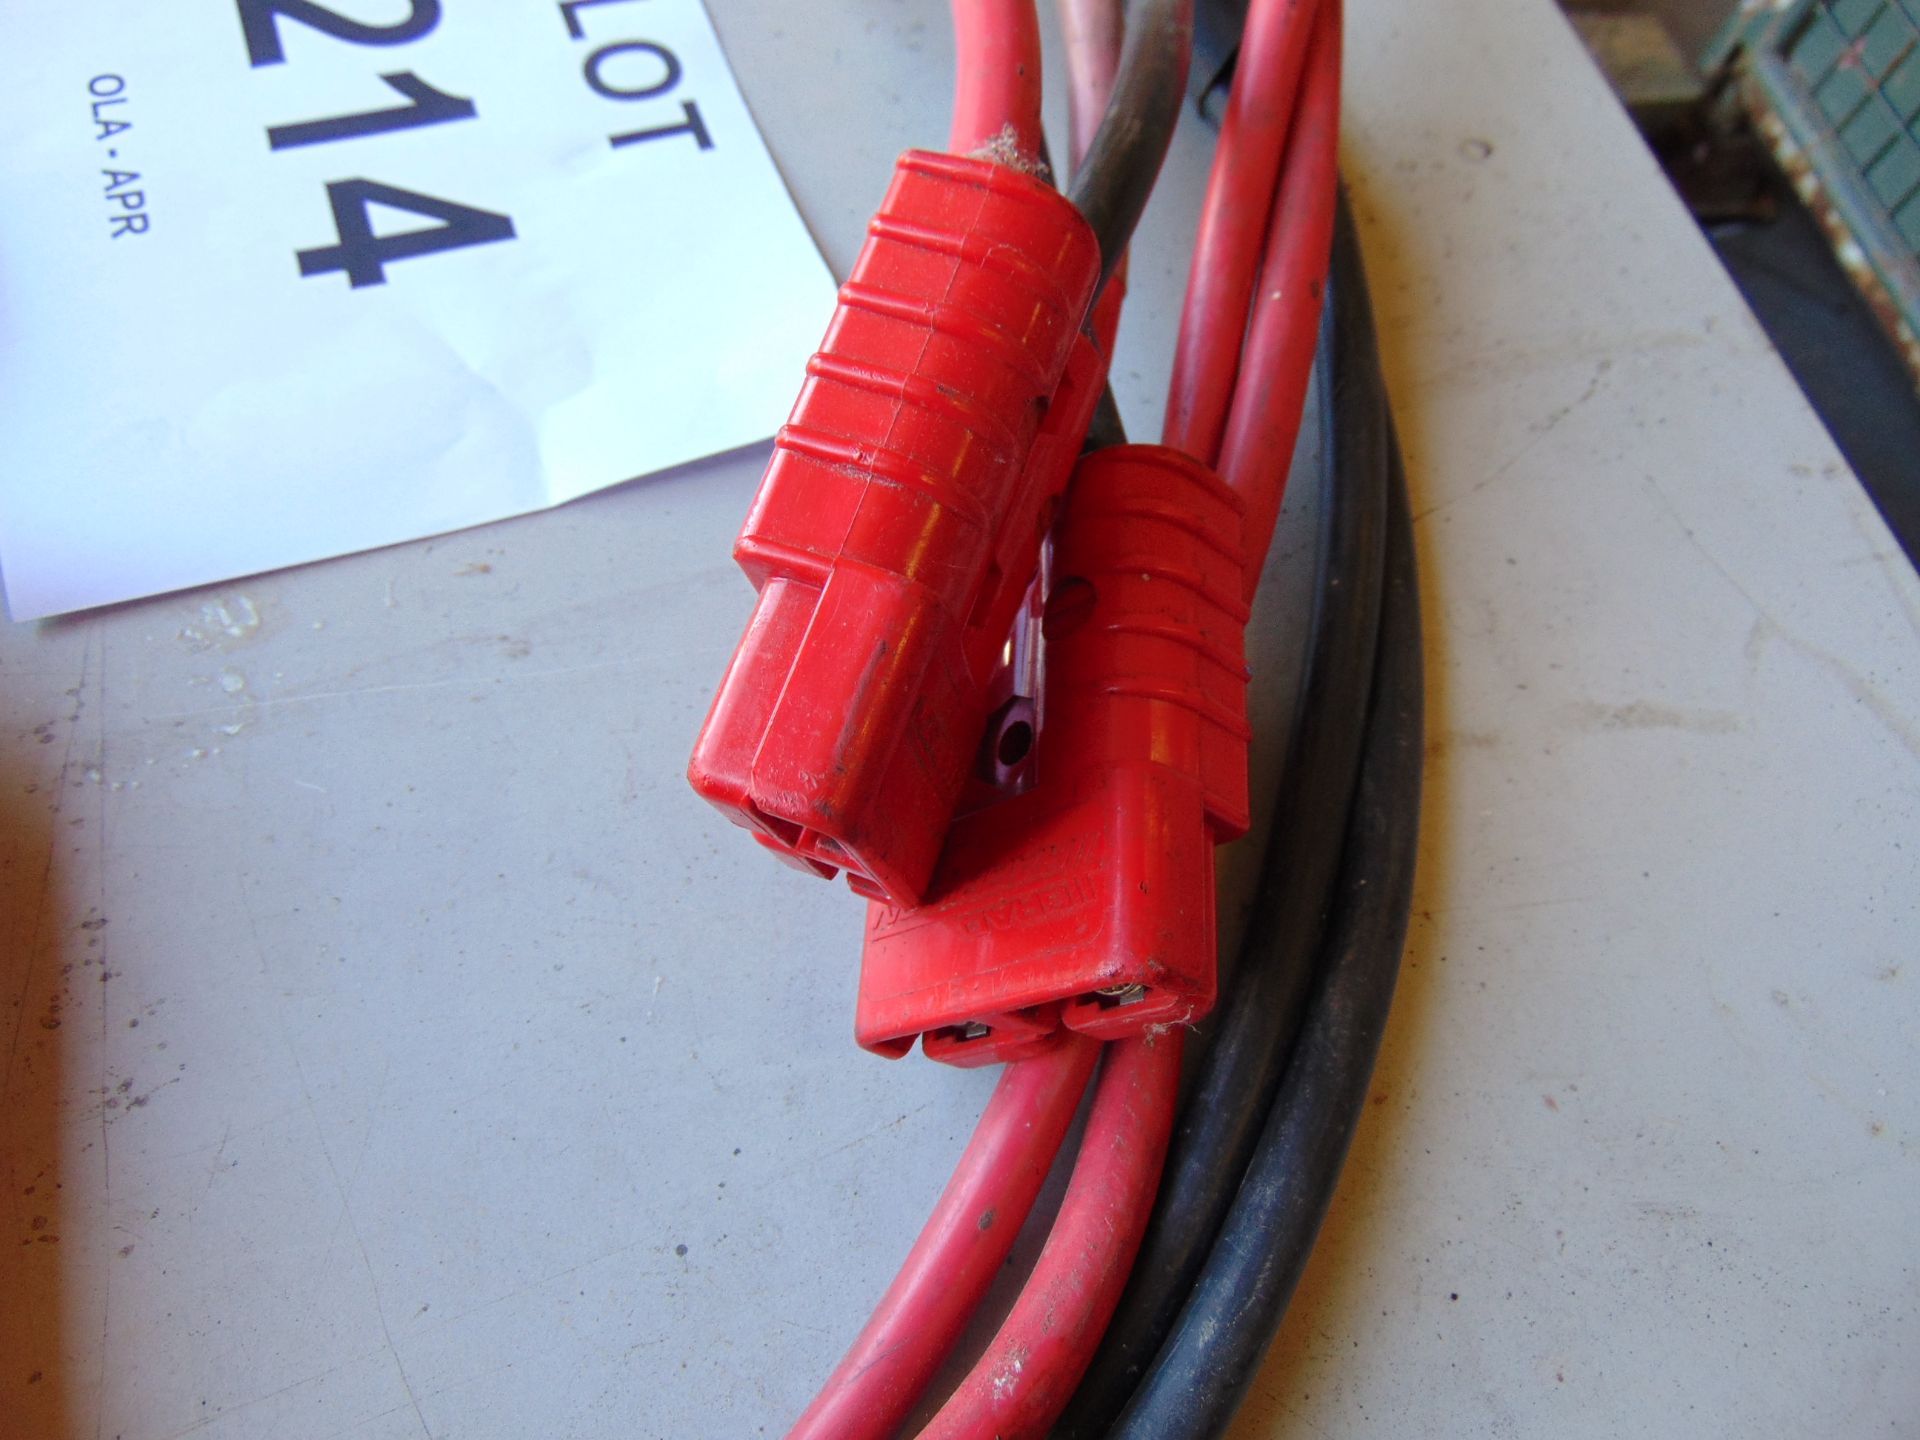 HD Jump Start Leads - Image 3 of 4